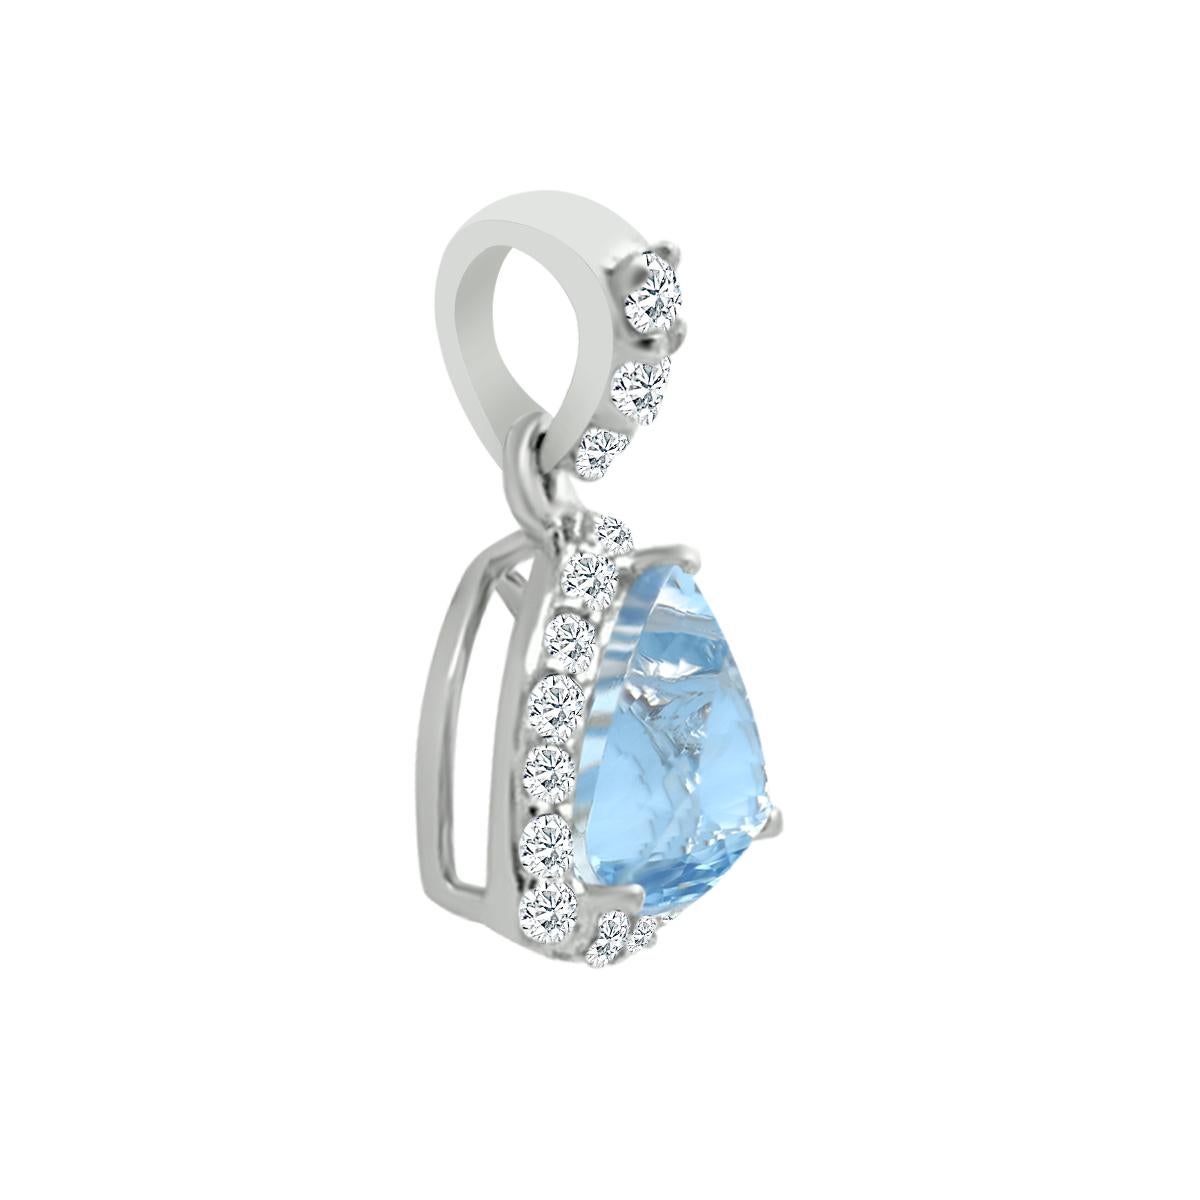 Modern 14K White Gold 0.94cts Aquamarine and Diamond Pendant, Style#TS1275AQP 22053/8 For Sale